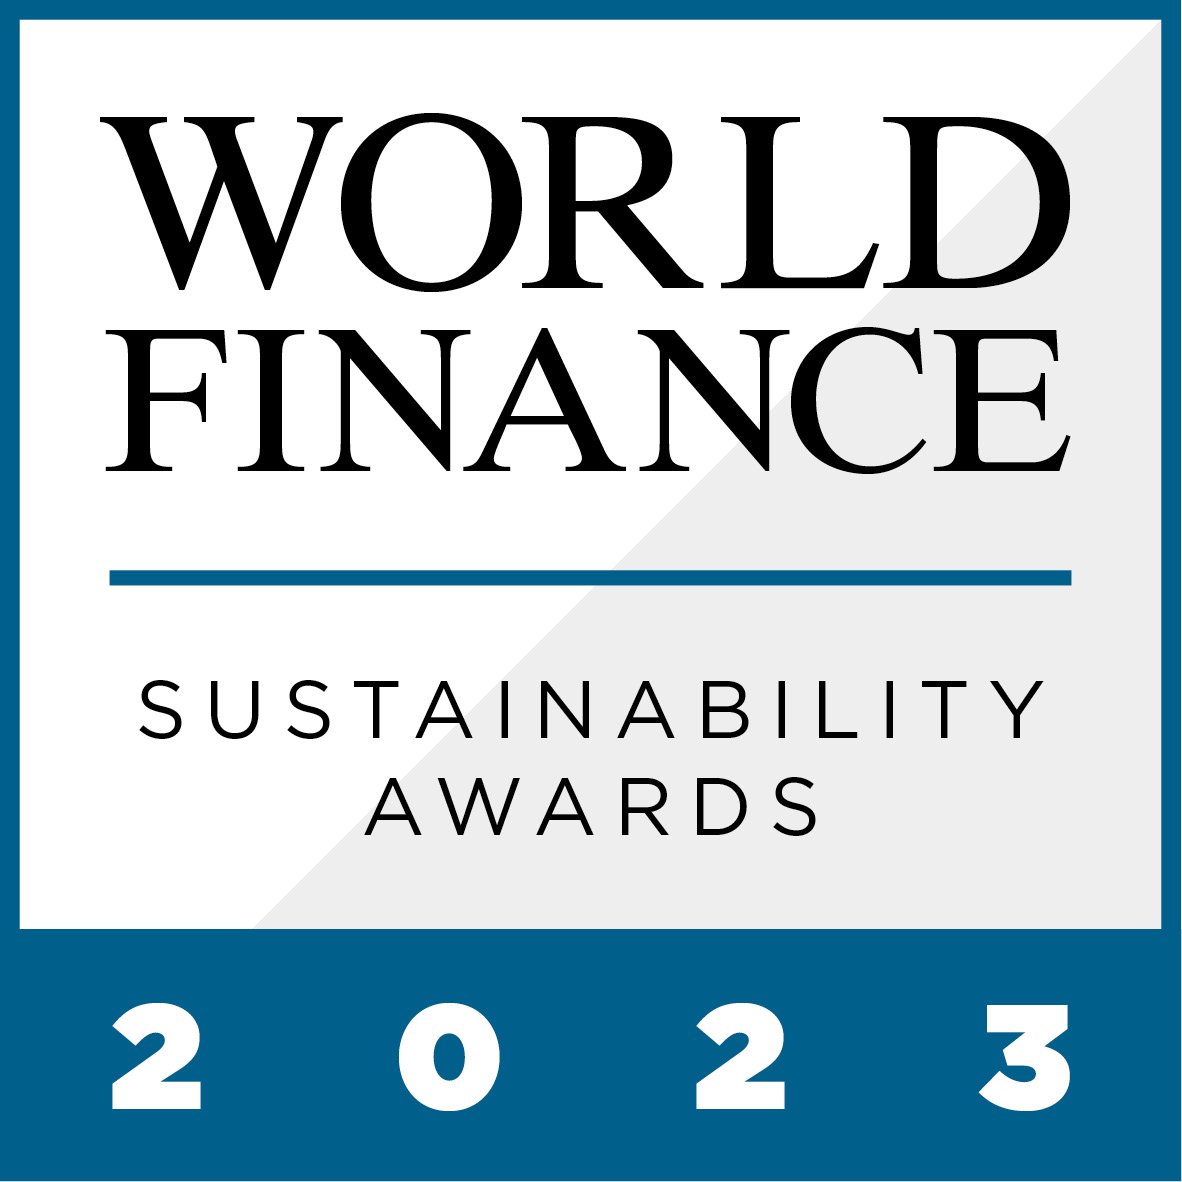 In the World Finance Sustainability Awards 2023, we celebrate those who have excelled in their sustainability efforts